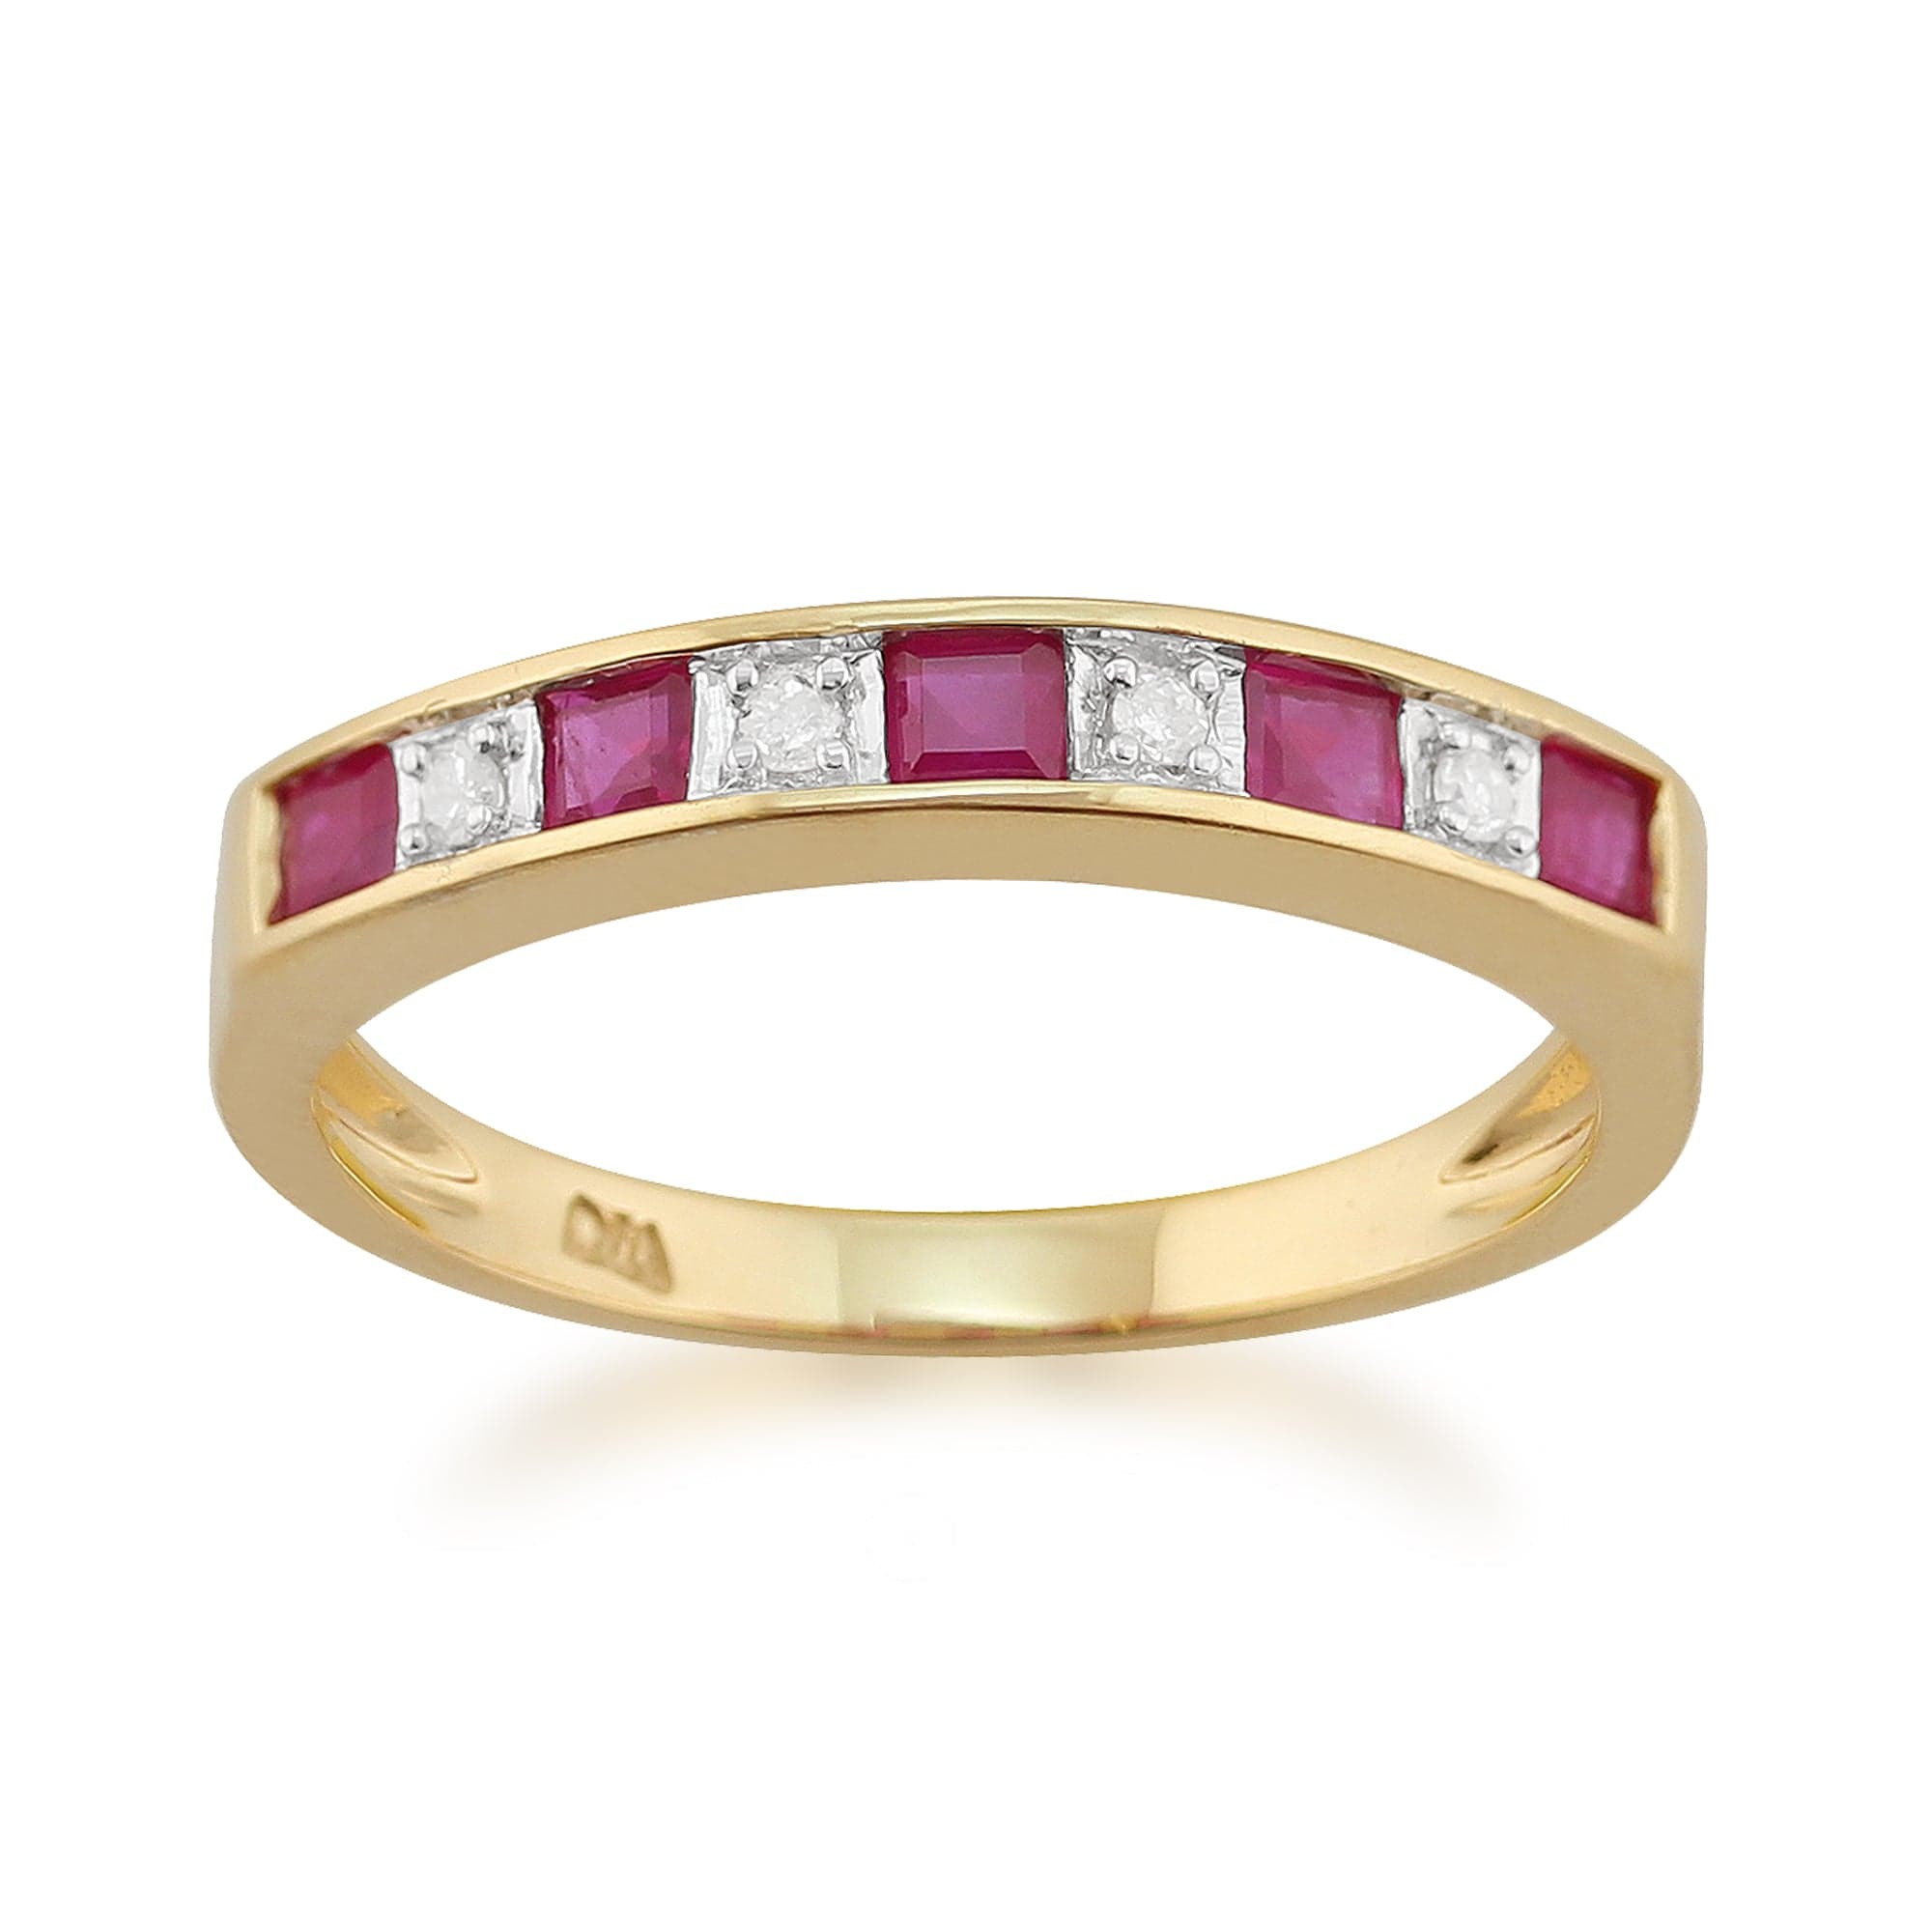 Classic Square Ruby & Diamond Half Eternity Ring in 9ct Yellow Gold